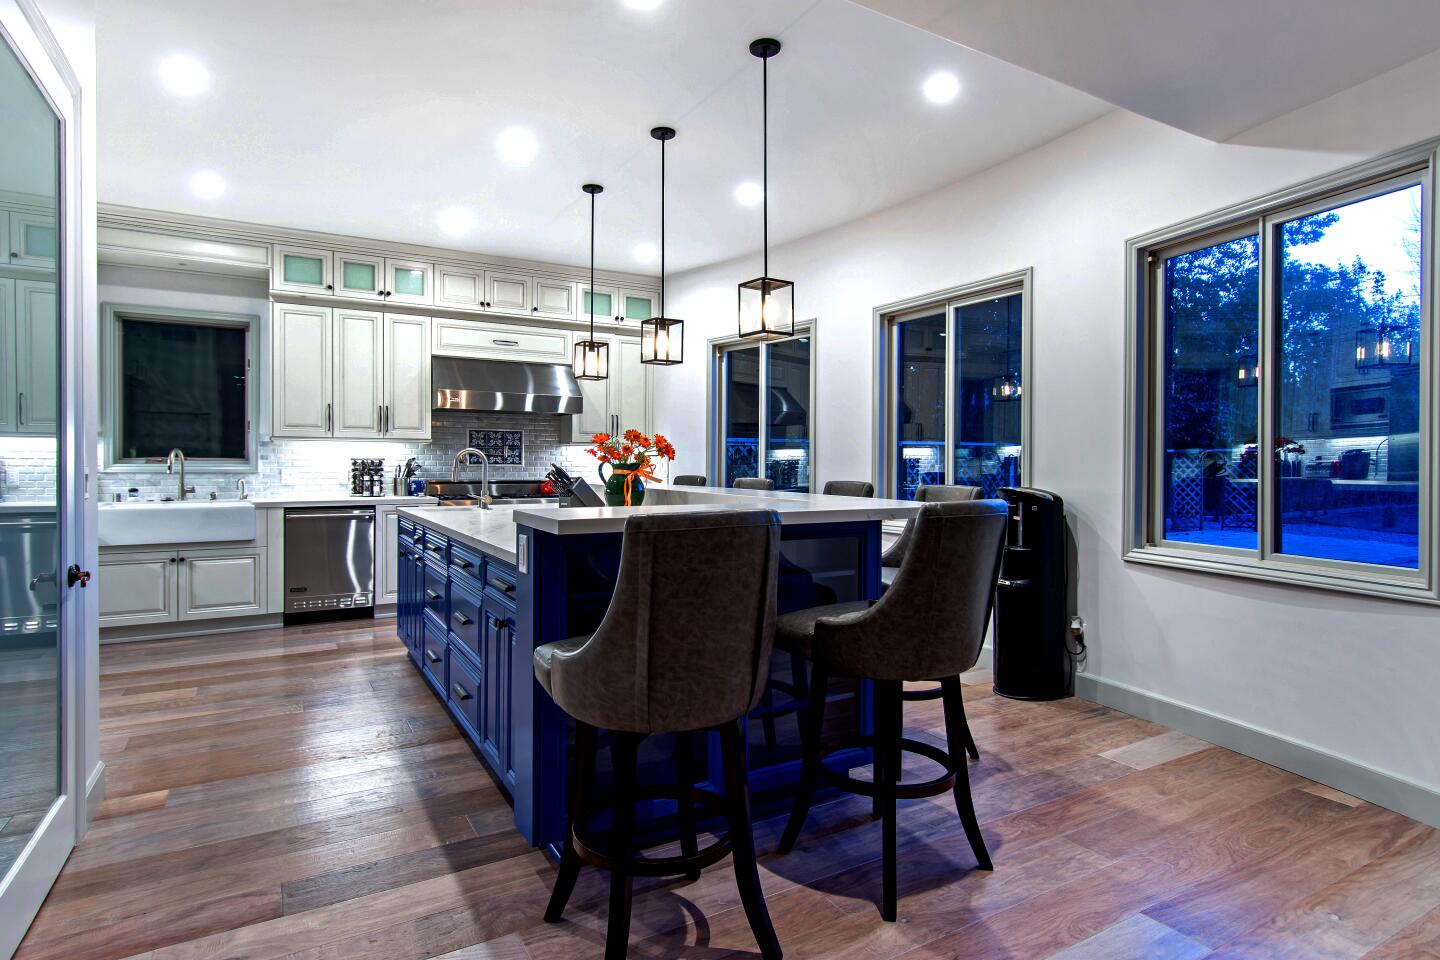 There's seating for six around the bright blue kitchen island.